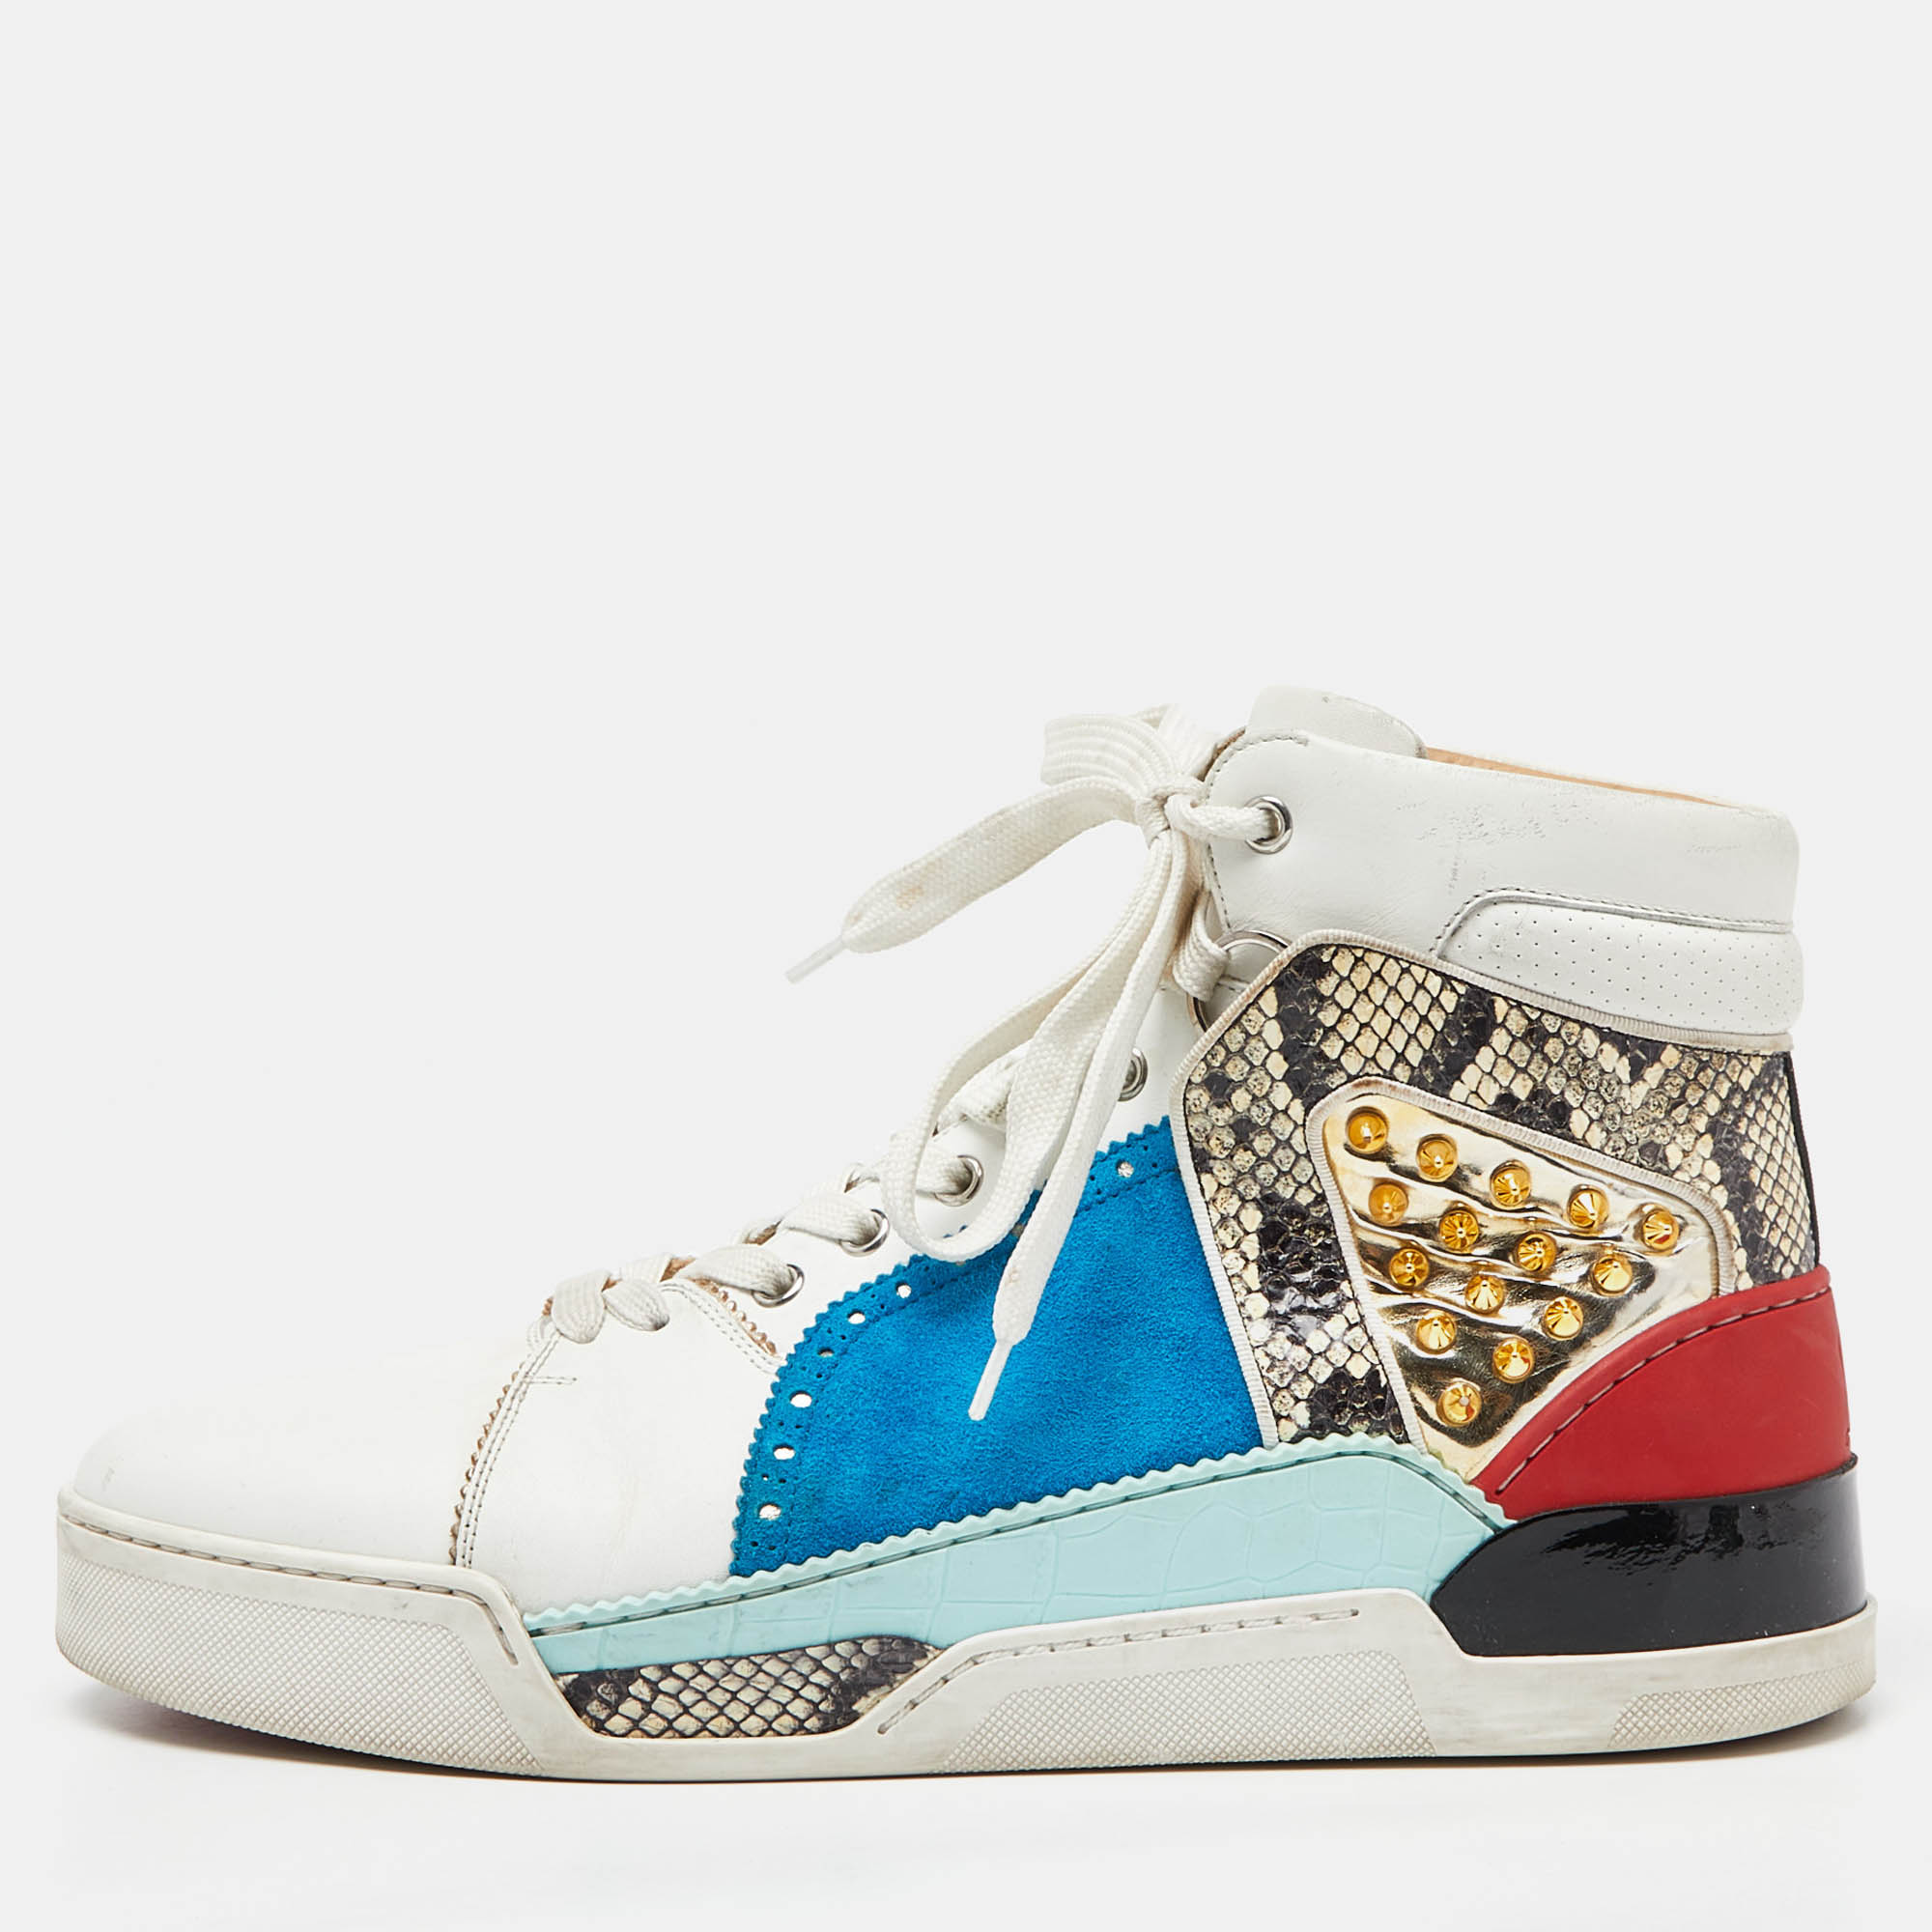 

Christian Louboutin Multicolor Suede and Python Leather Loubikick High Top Sneakers Size